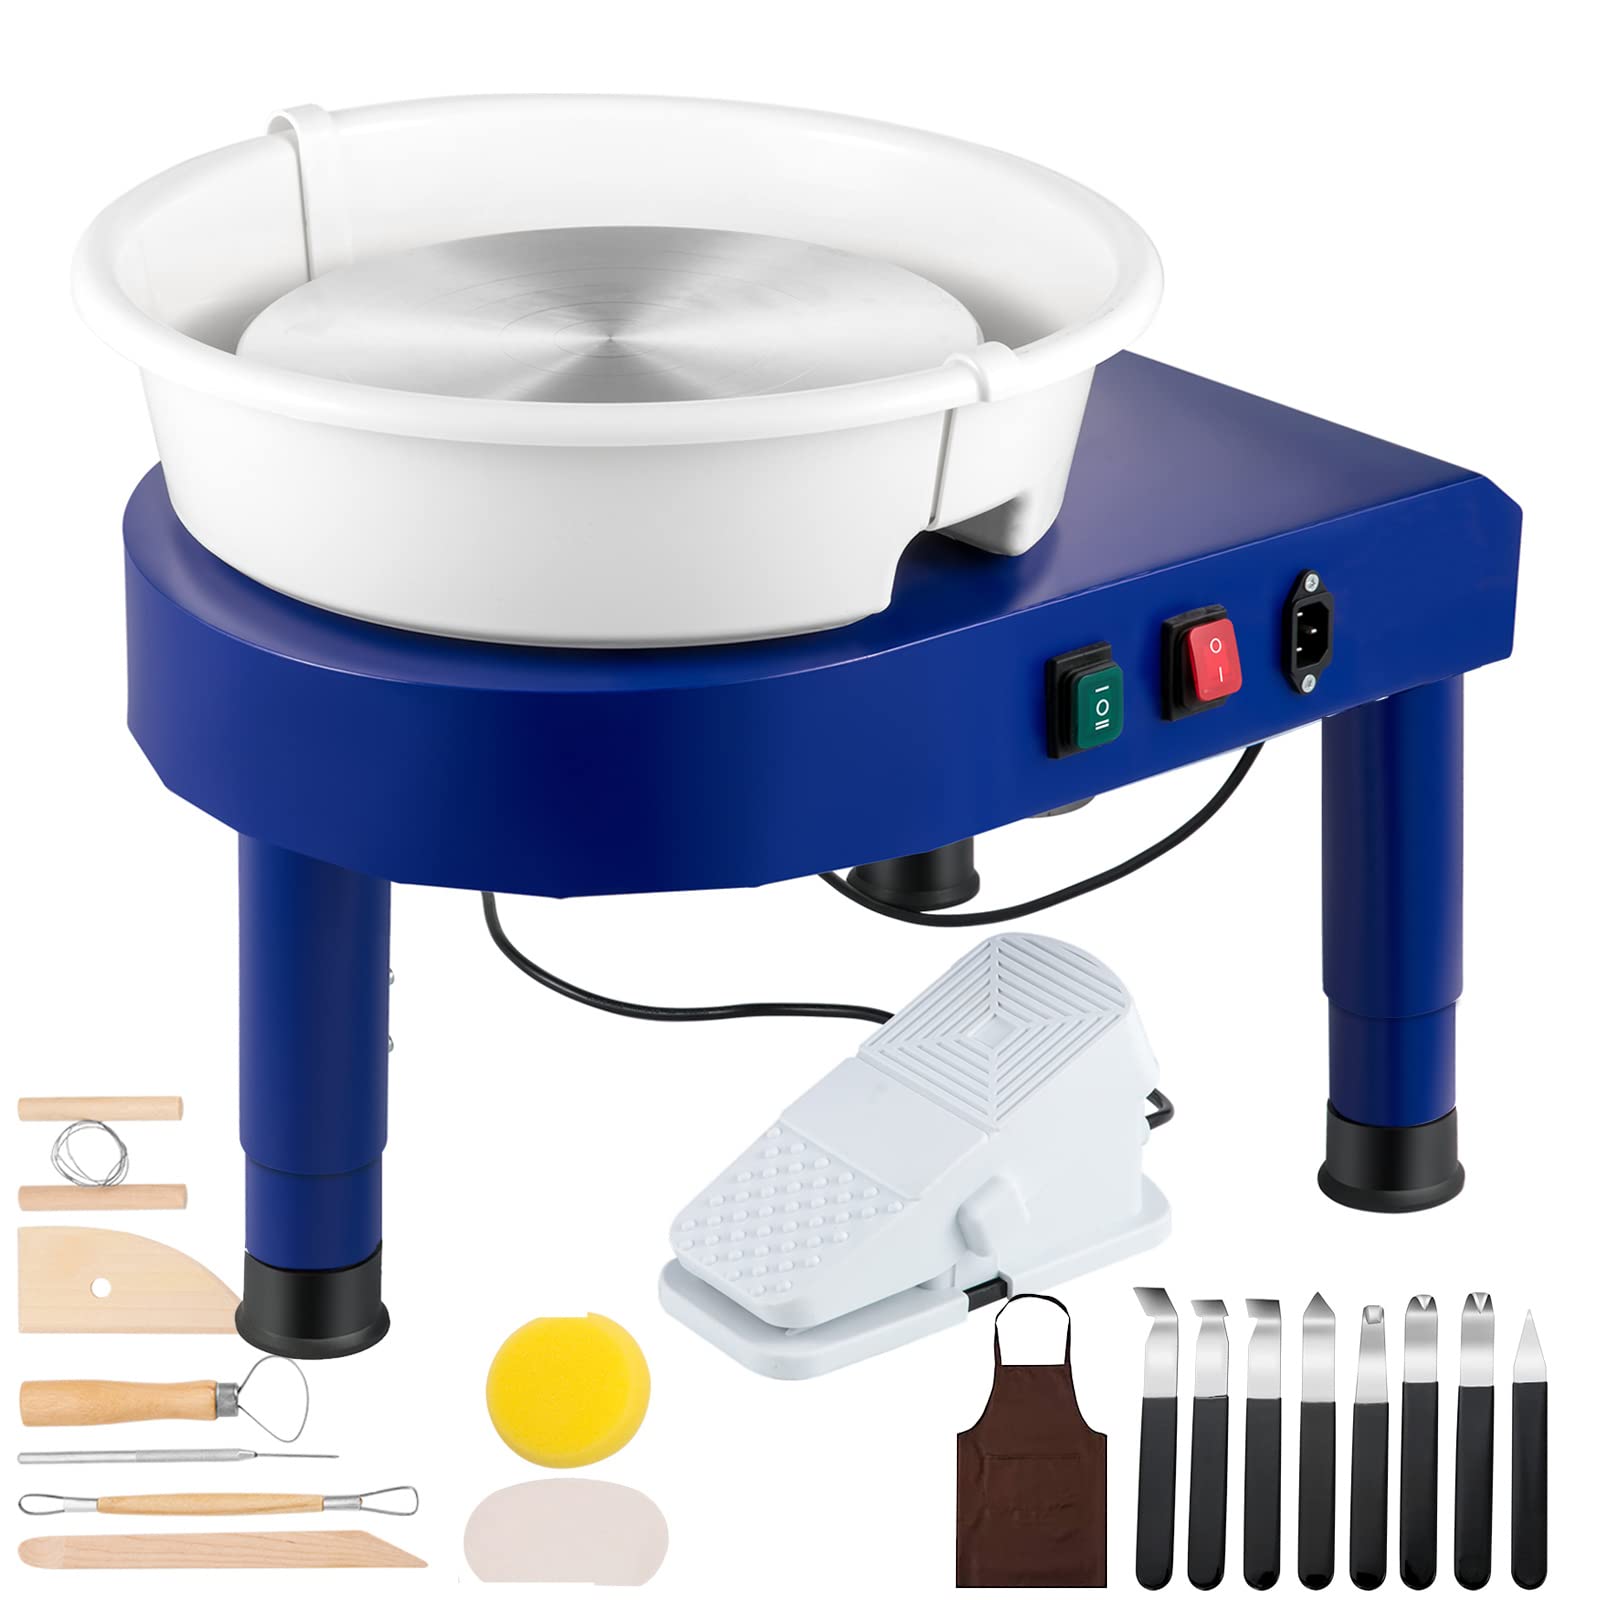 VEVOR 0-7.8in Lift-Table 0-300RPM Electric Clay Machine Pottery Wheel with Foot Pedal Detachable Basin Sculpting Tool Accessory Kit, Blue